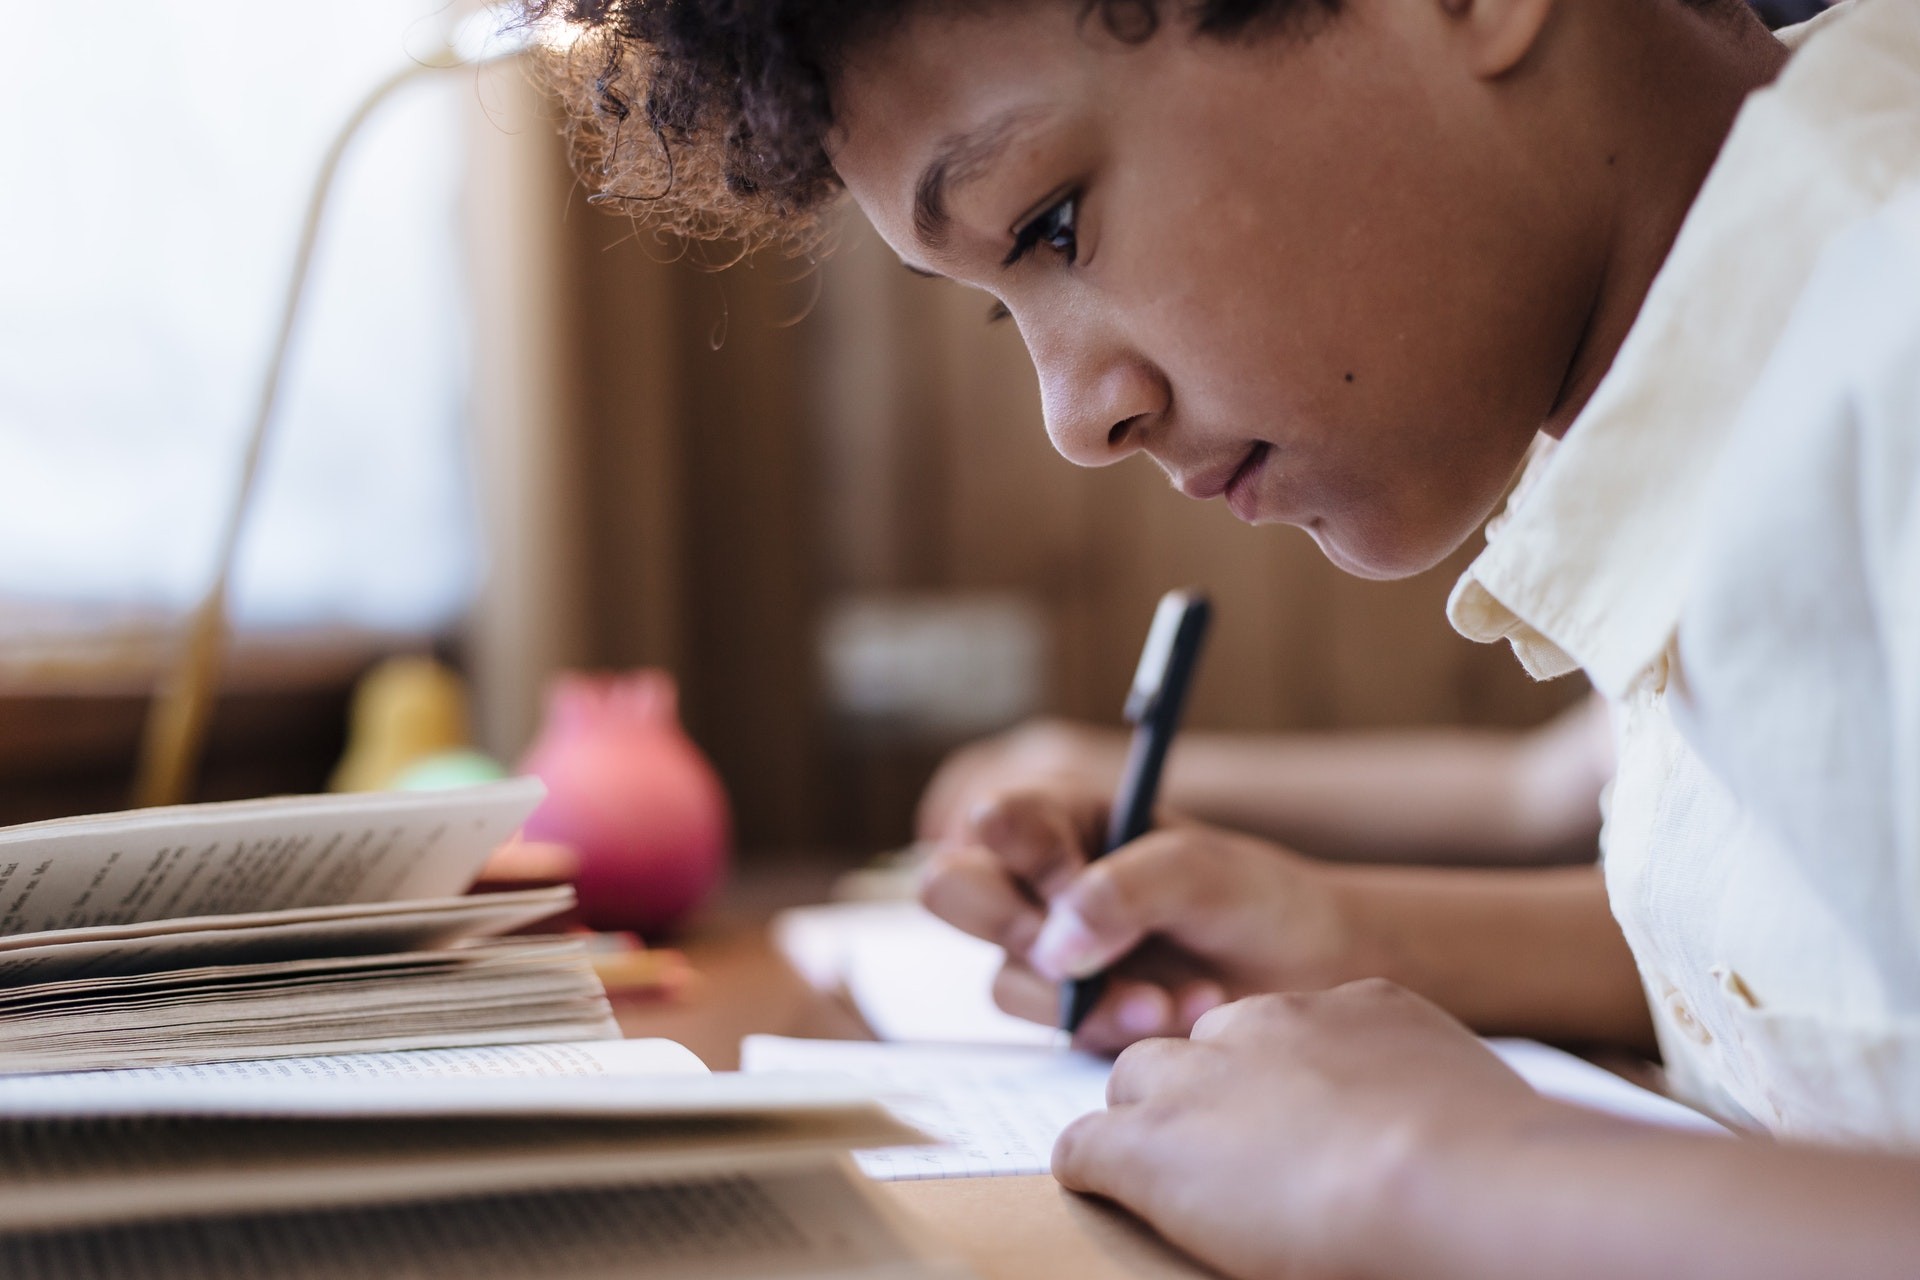 Young boy works on english language learning skills at home by writing in a notebook. 